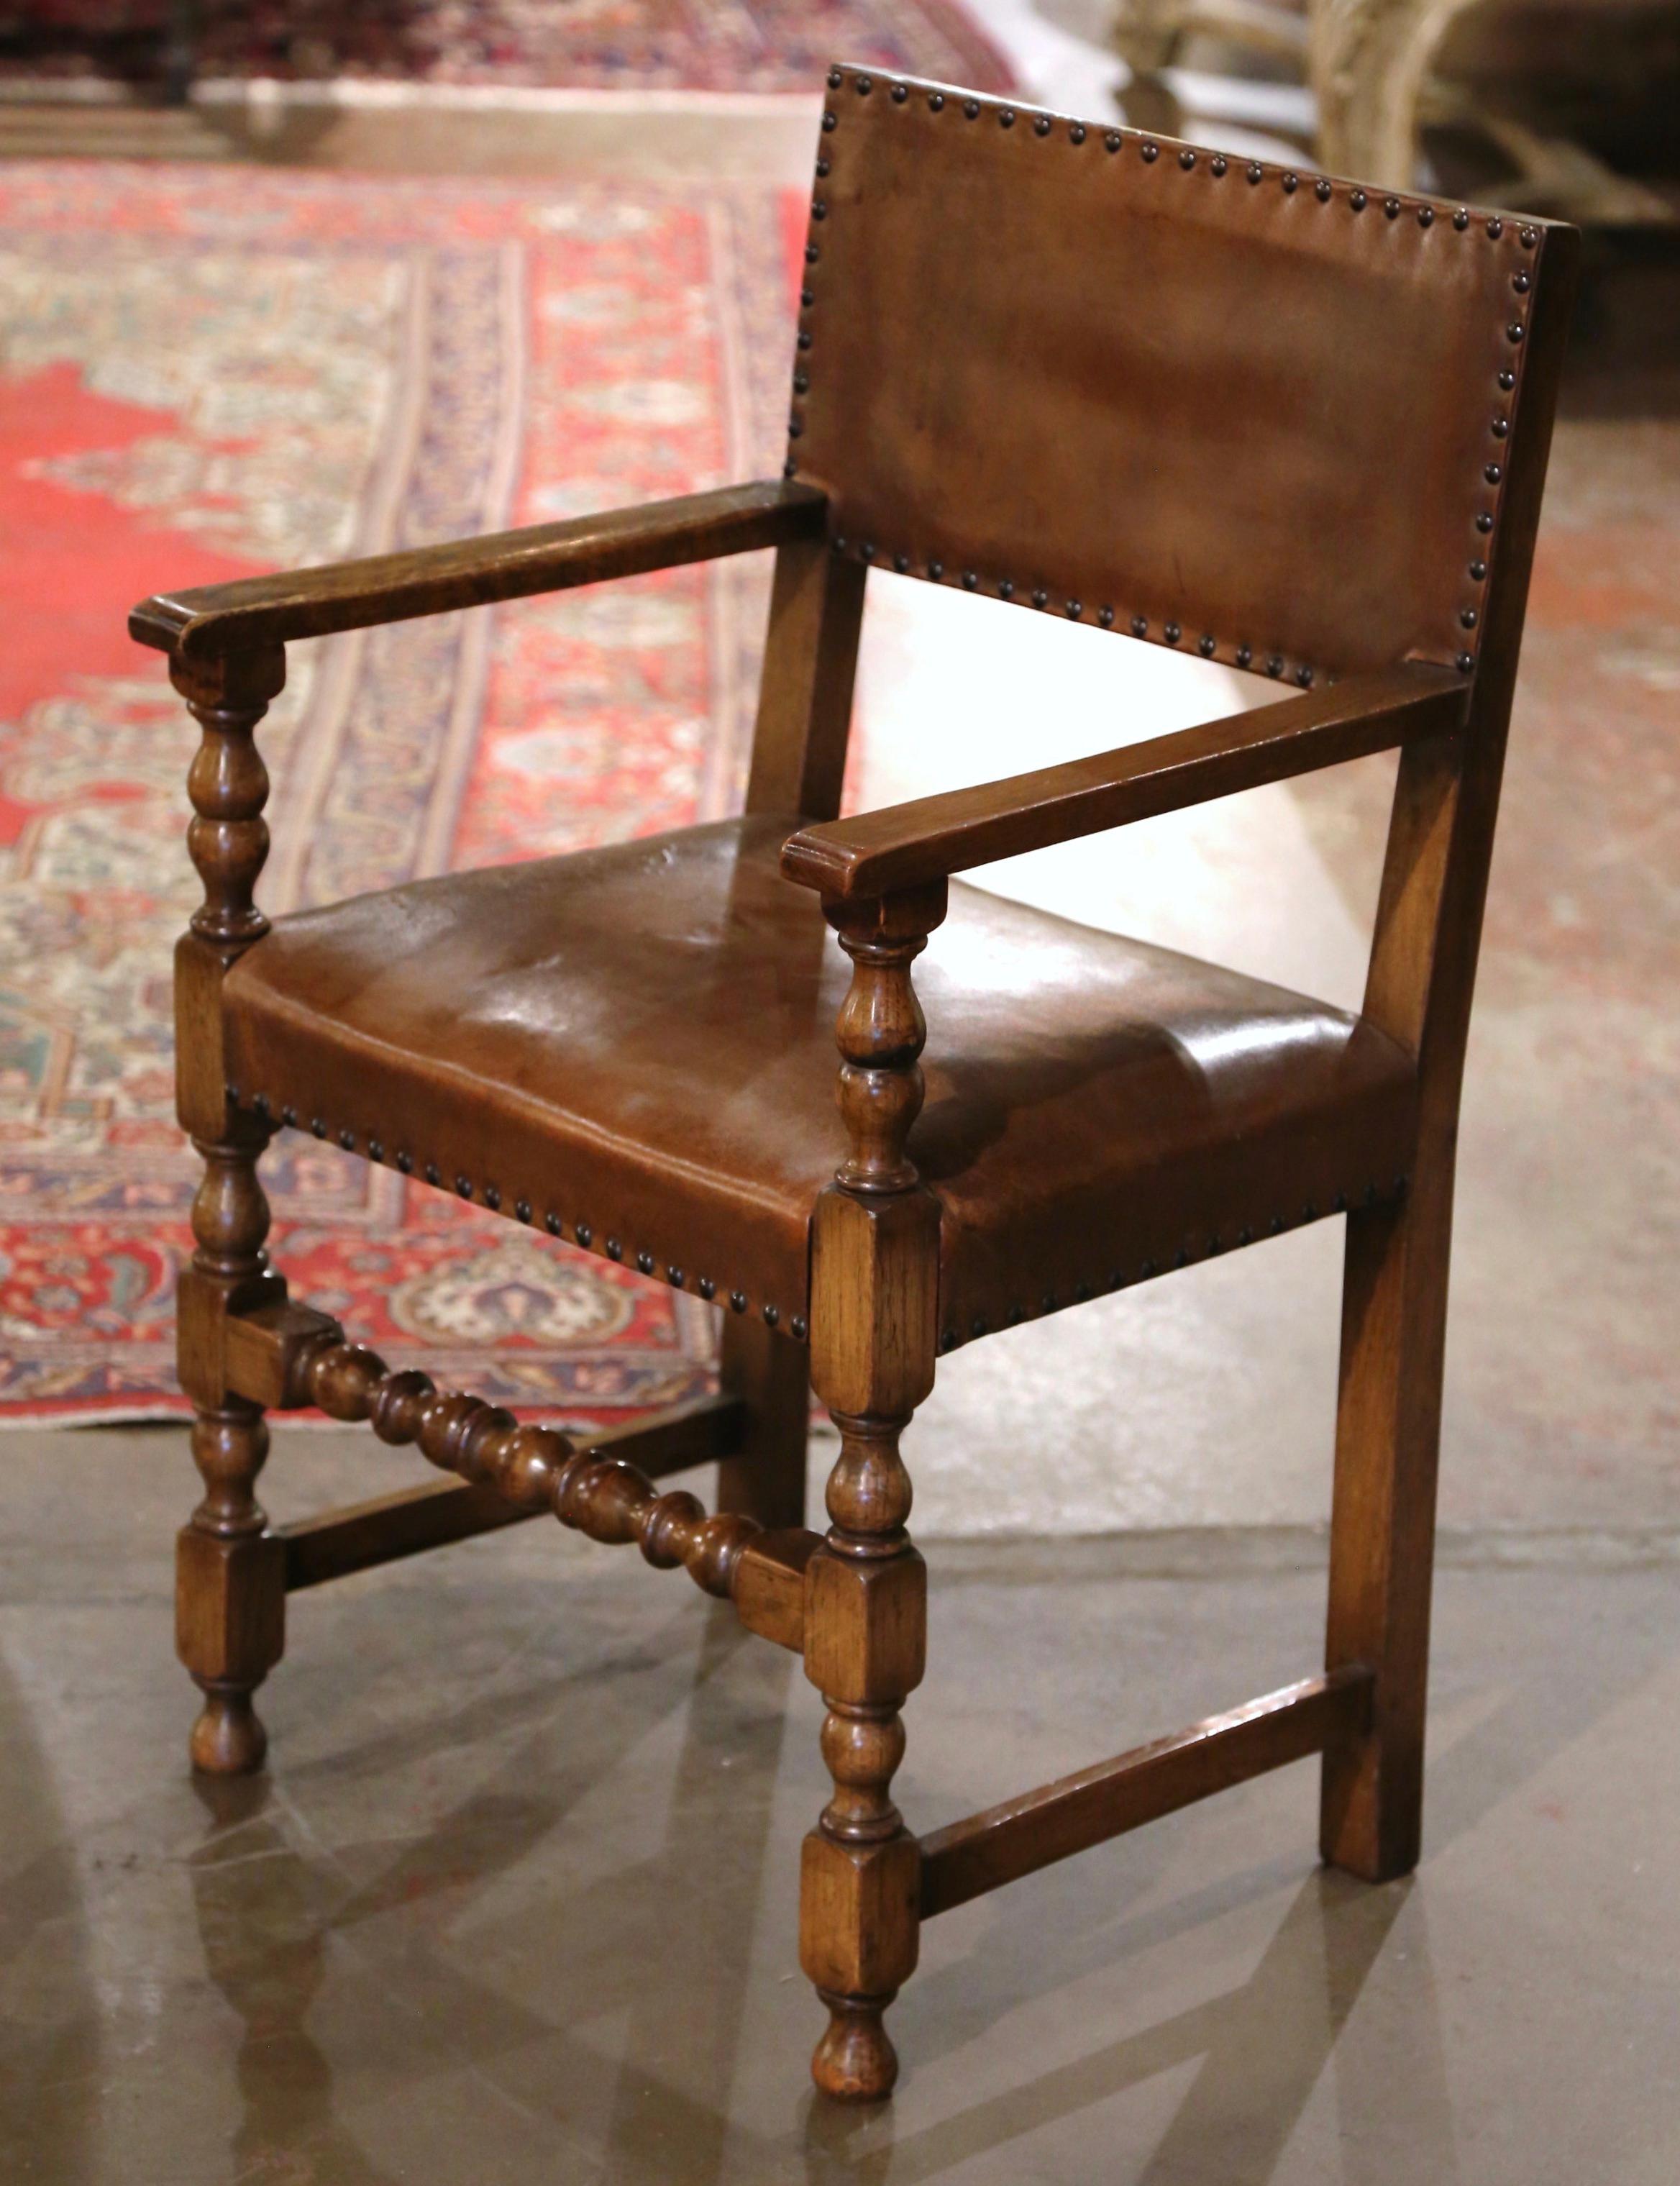 Crafted in Southern France circa 1890, and built of oak wood, the comfortable armchair stands on front turned legs with bottom stretcher; it features a wide seat, open armrests and a curved rectangular back. The chair is upholstered with the